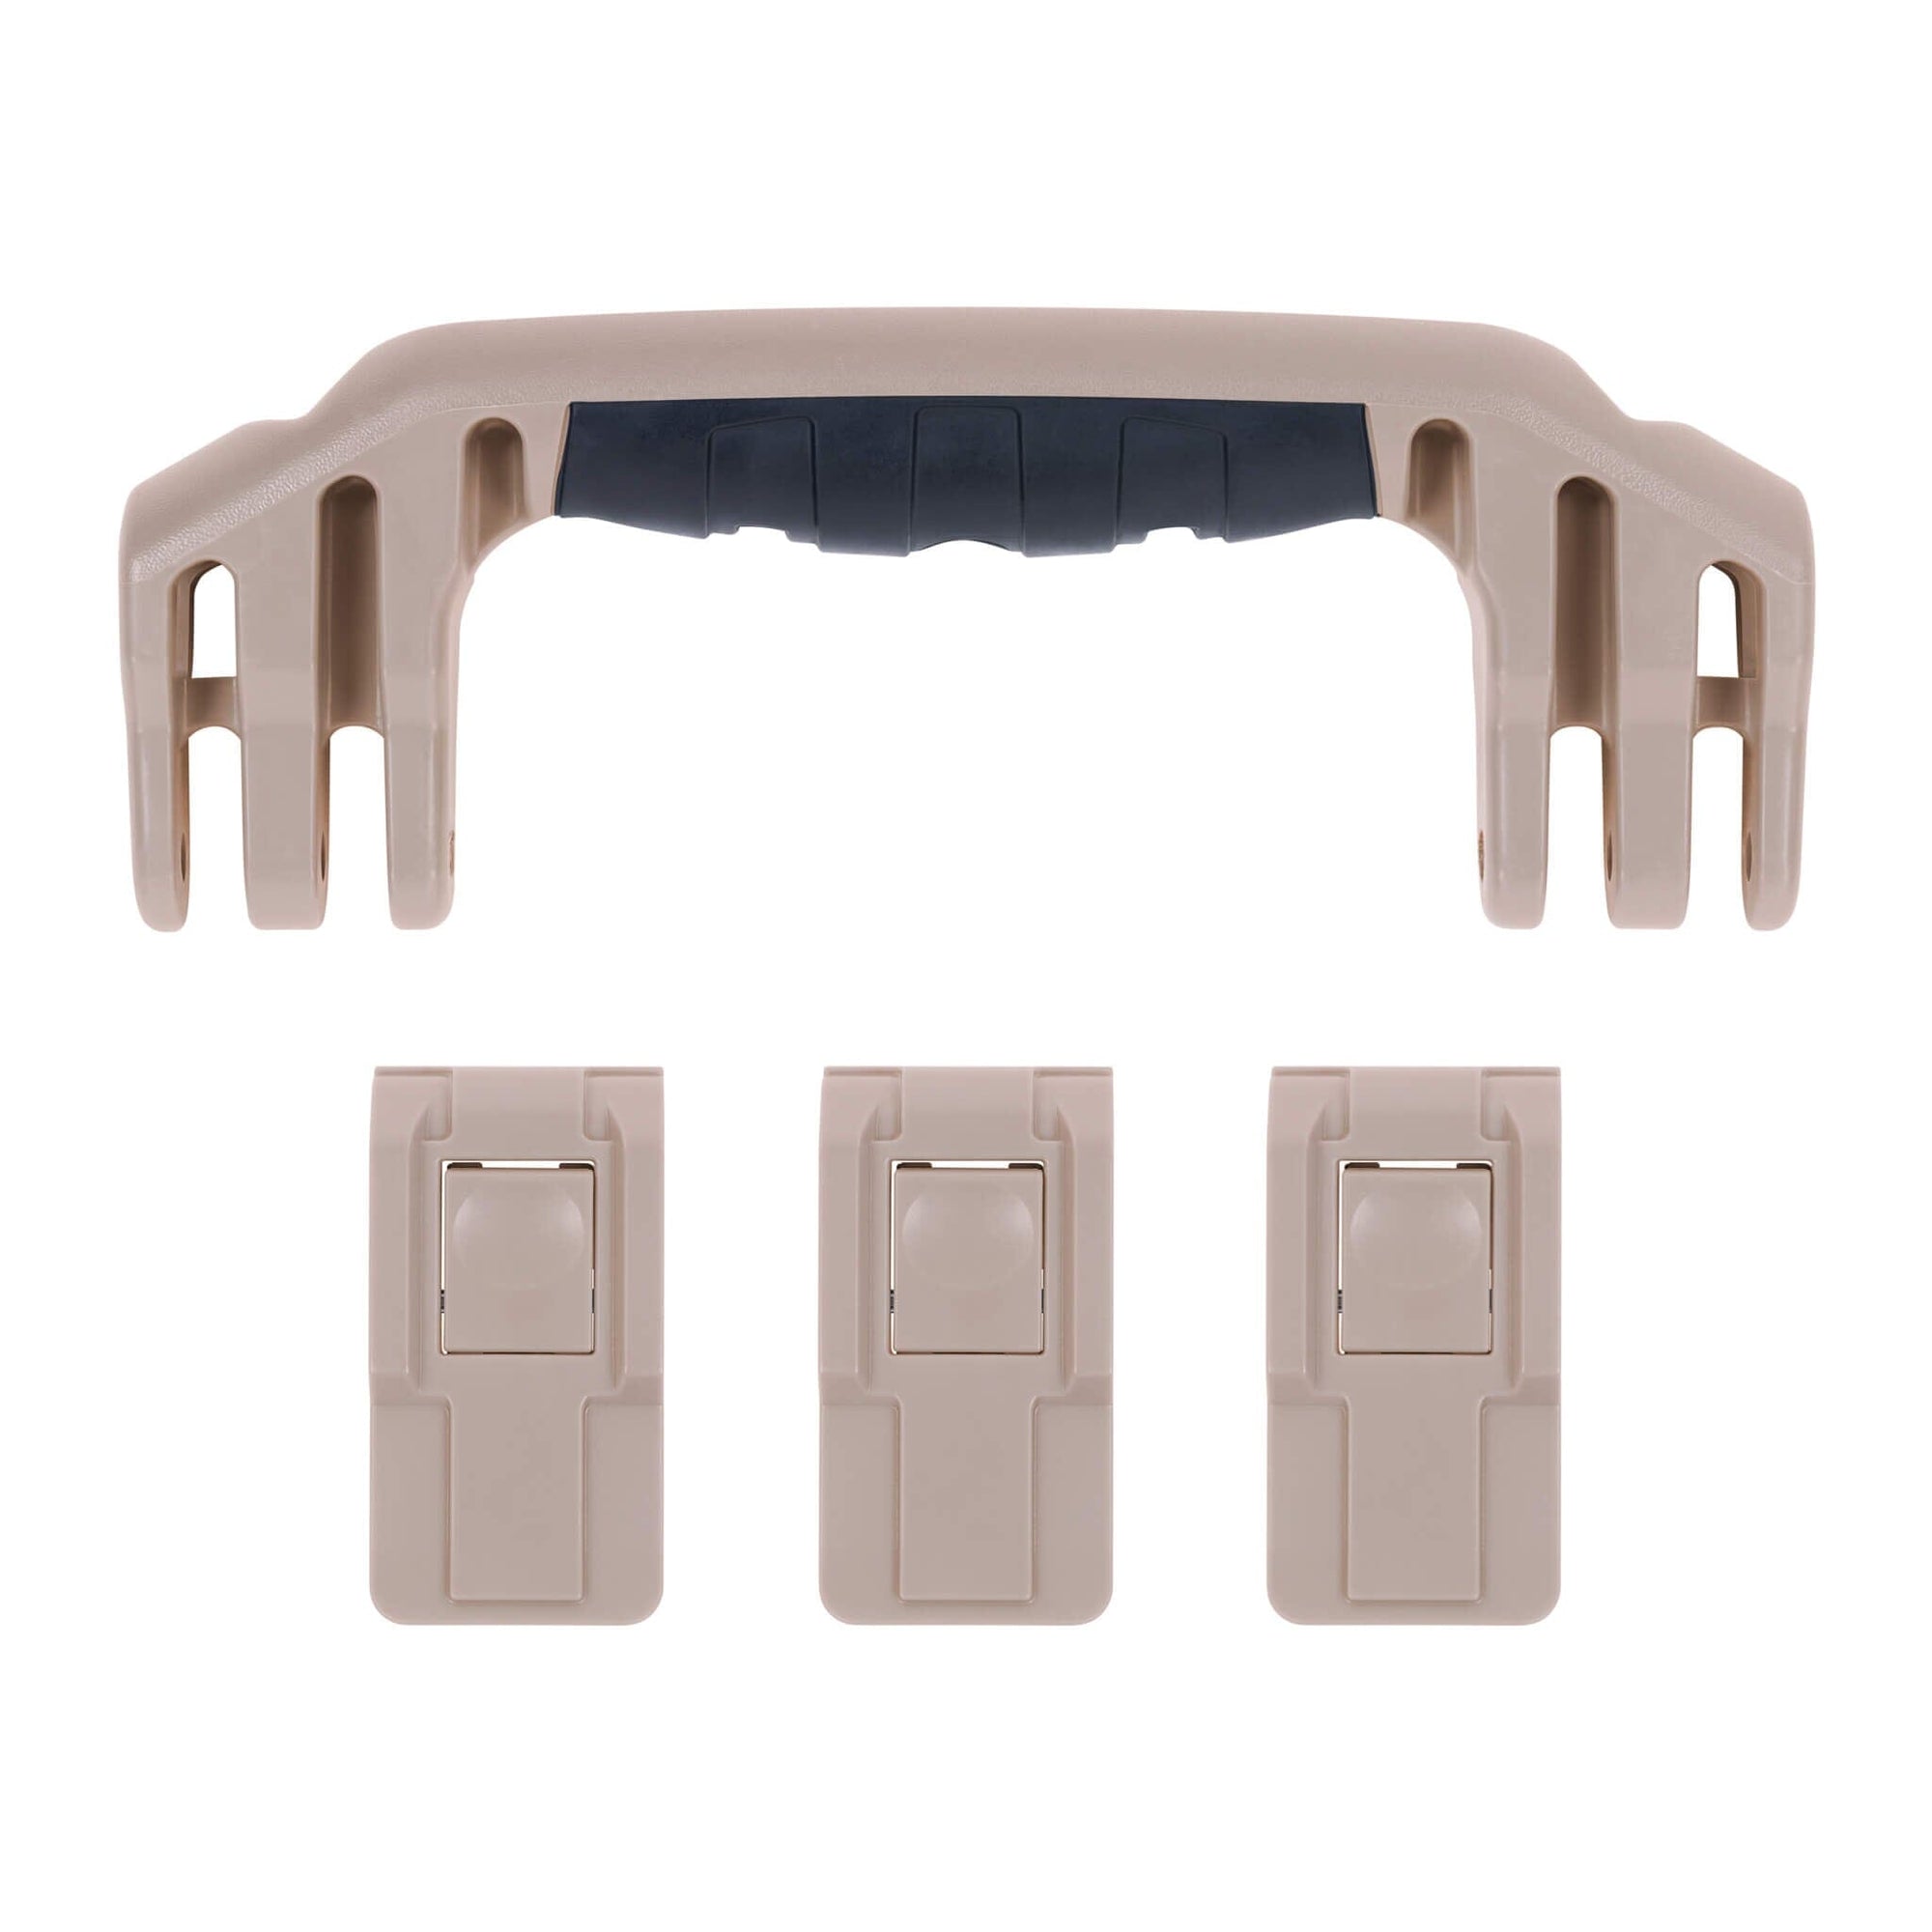 Pelican 1555 Air Replacement Handle & Latches, Desert Tan (Set of 1 Handle, 3 Latches) ColorCase 